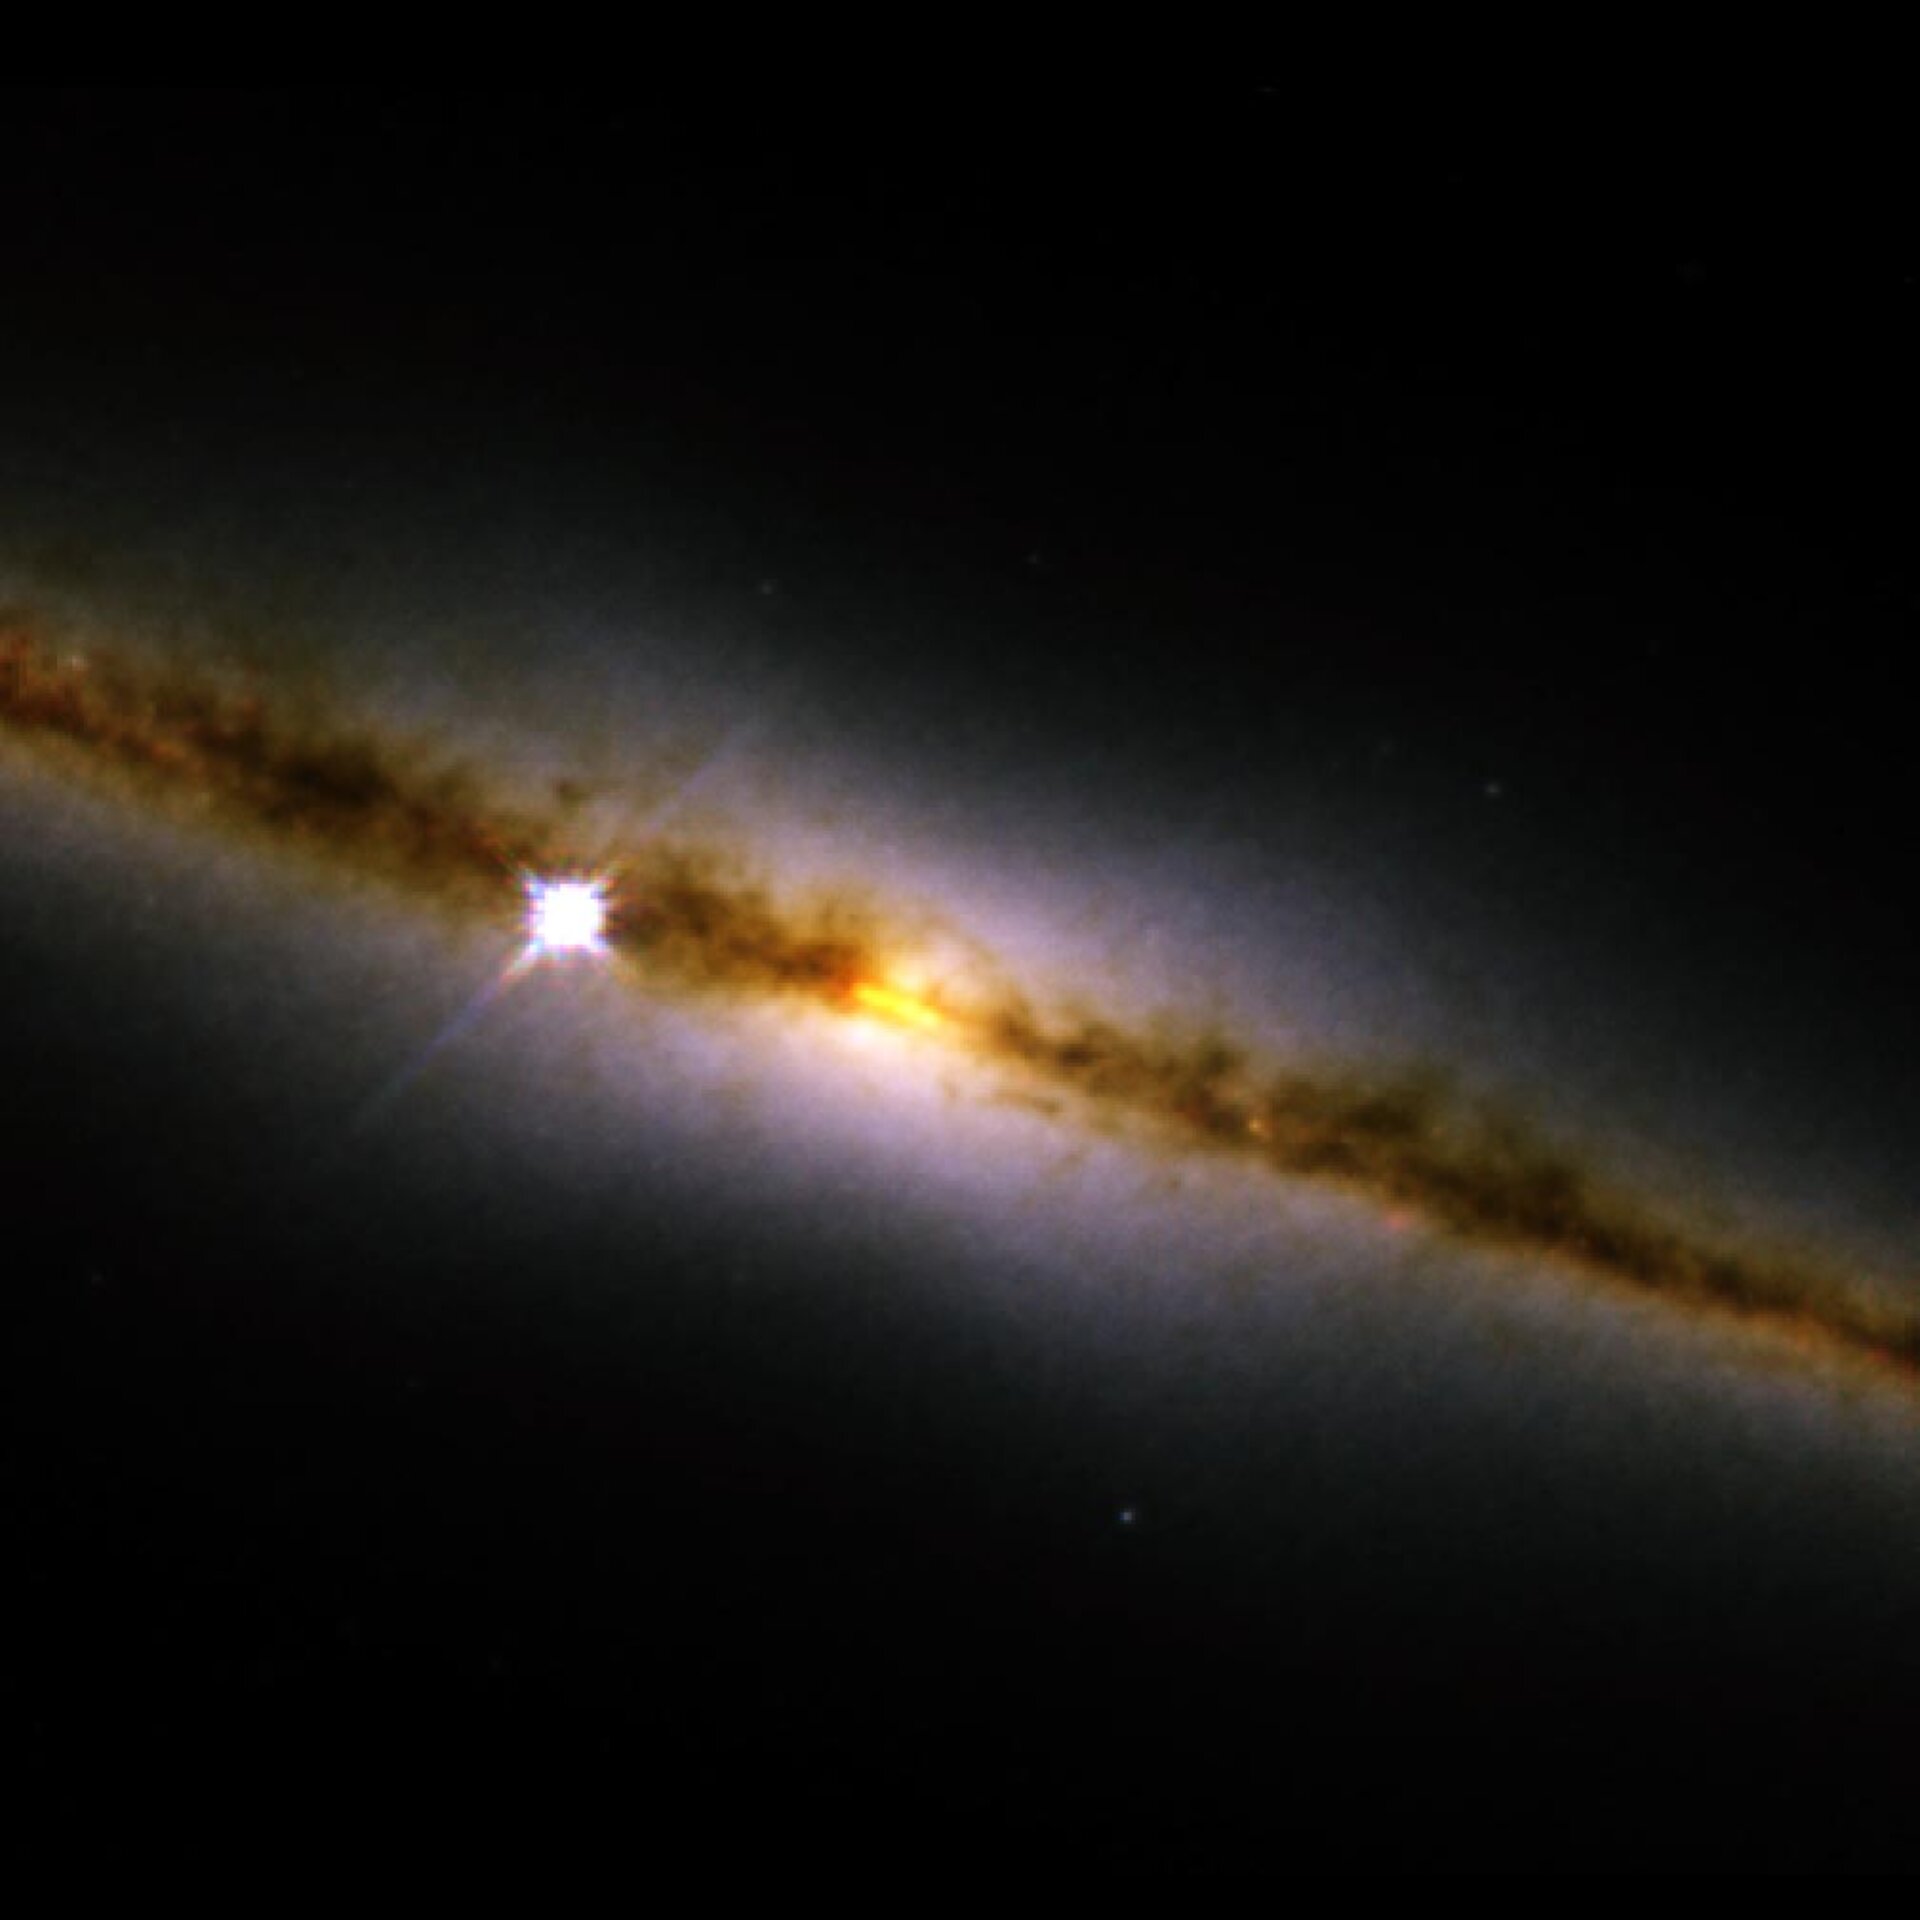 NICMOS finds a golden ring at the heart of a galaxy (NICMOS image)